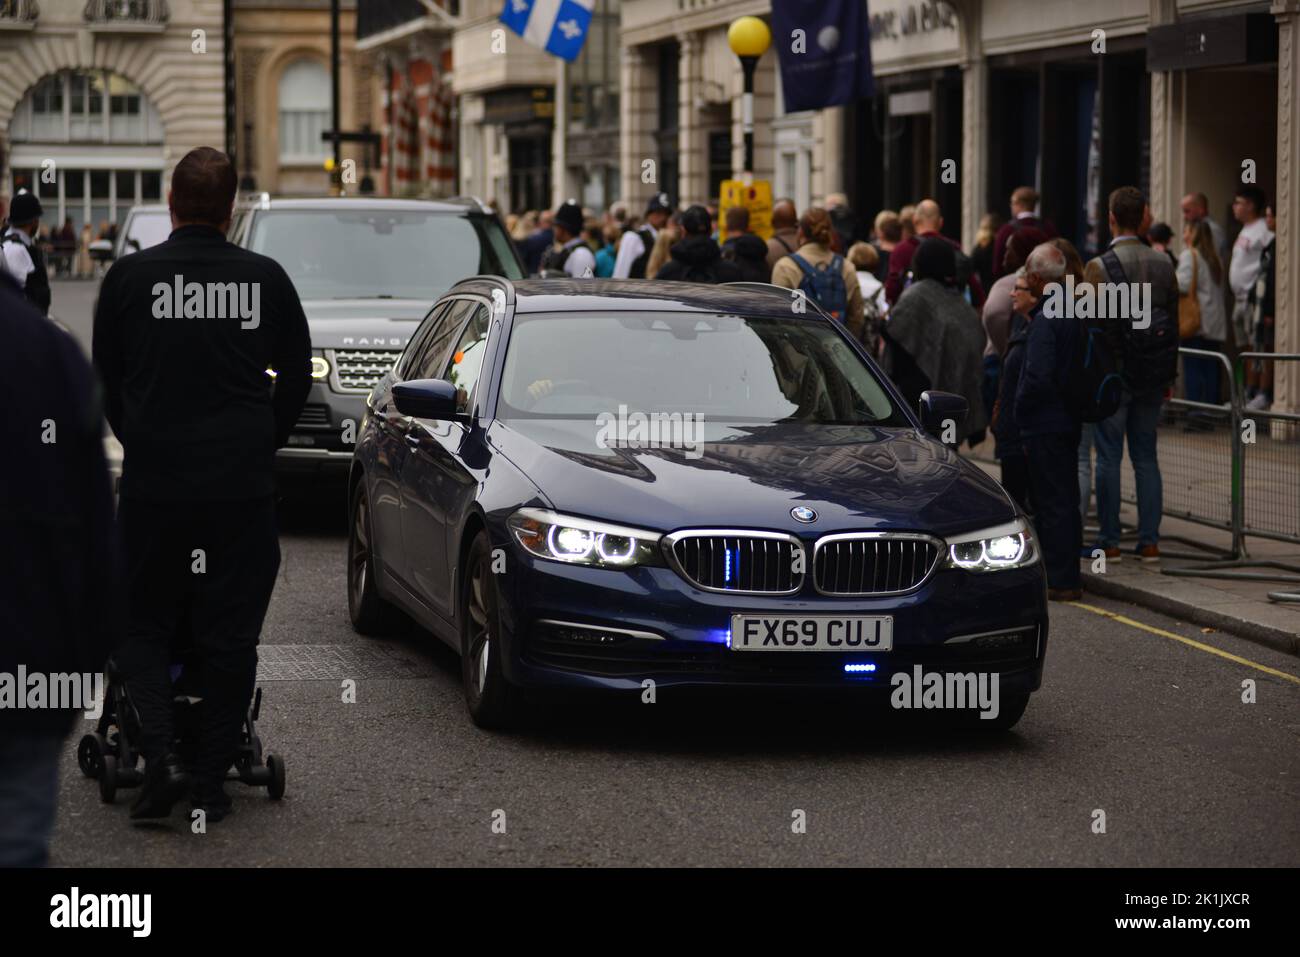 State funeral of Her Majesty Queen Elizabeth II, London, UK, Monday 19th September 2022. VIPs on the move with a police escort through crowds of people. Stock Photo